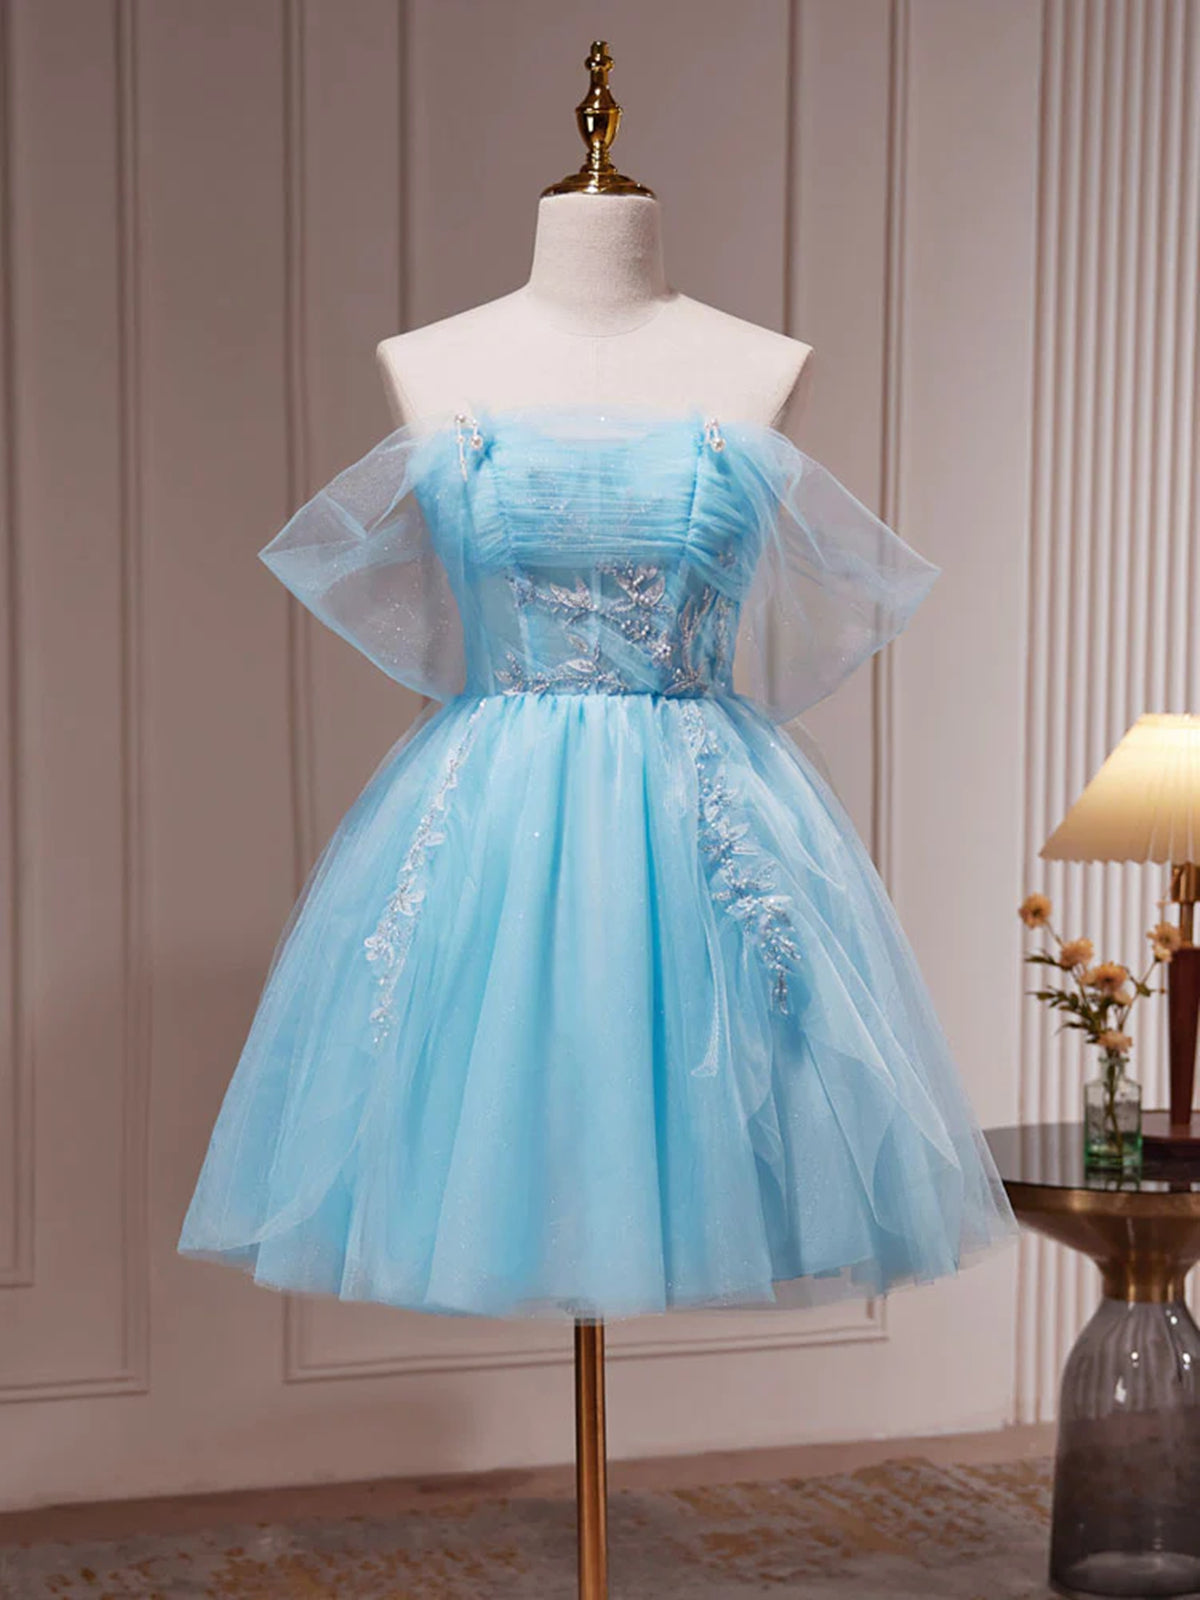 Bridesmaid Dress With Sleeves, Off the Shoulder Short Blue Prom Dresses, Short Blue Lace Formal Homecoming Dresses